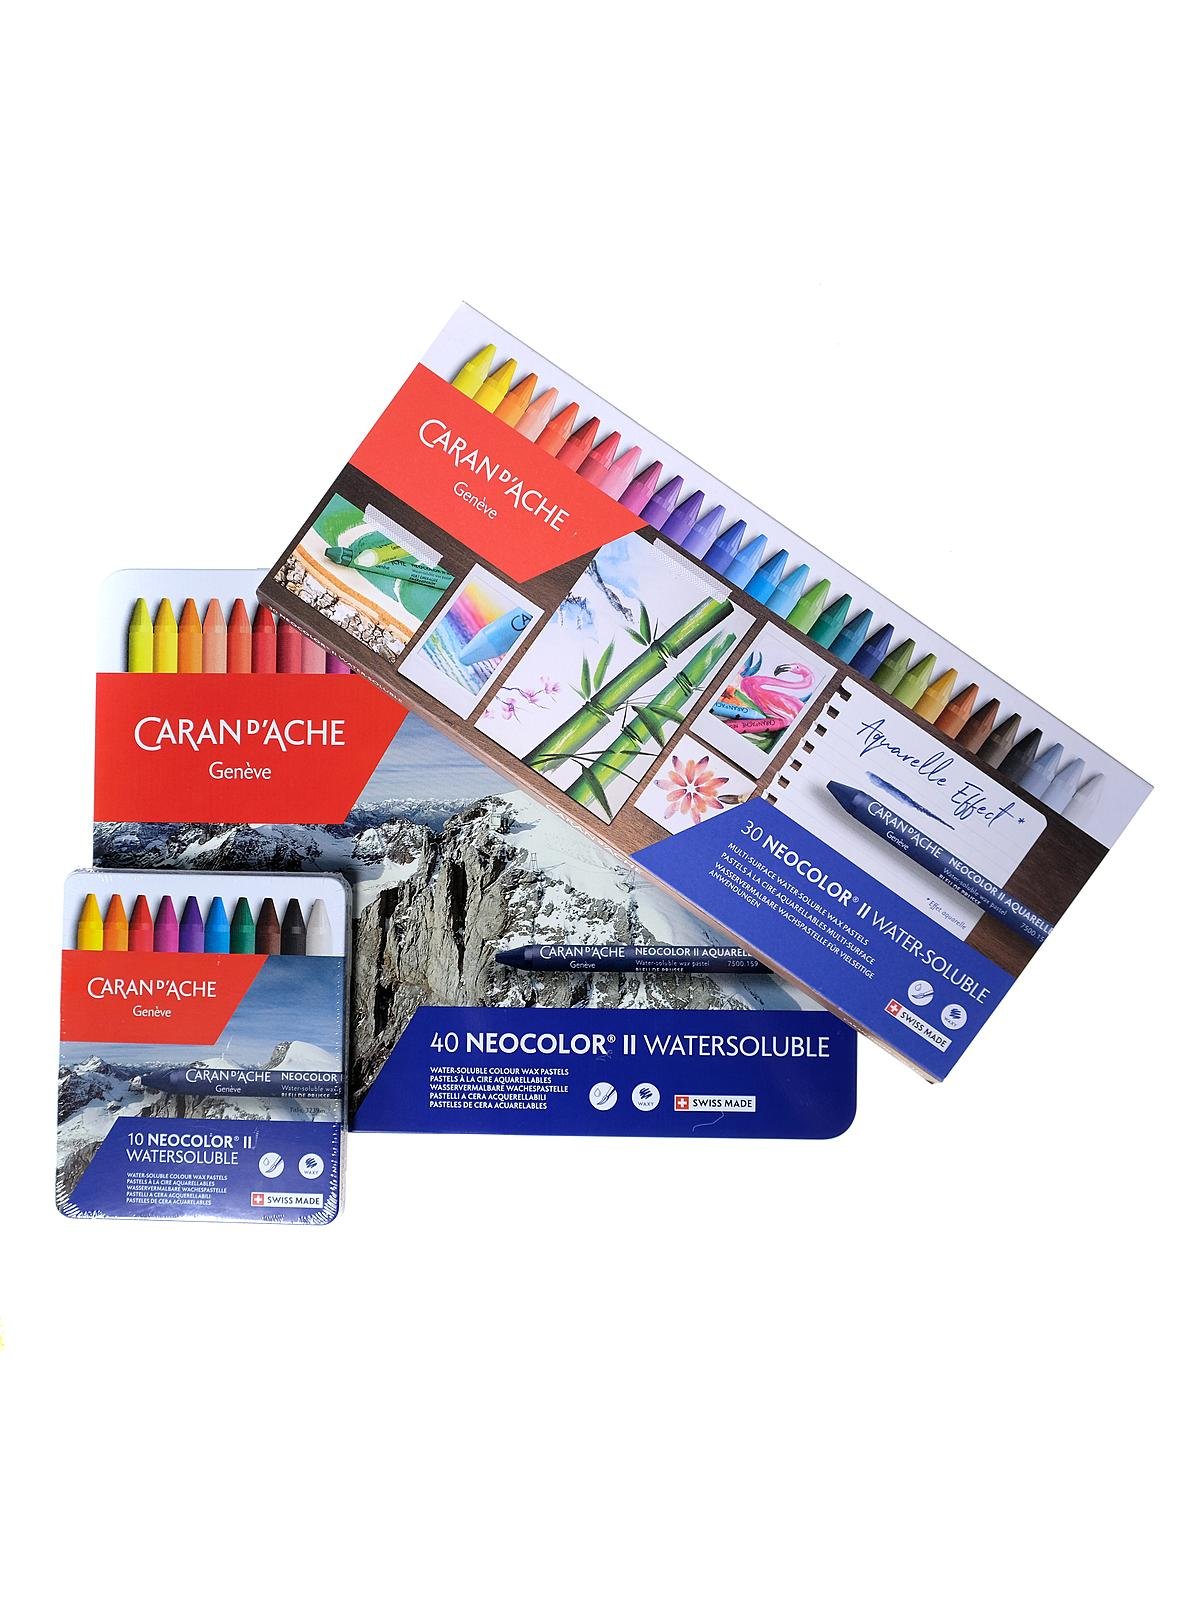 CARAN D’ACHE NEOCOLOR II TIN of 10 water soluble wax pastels 